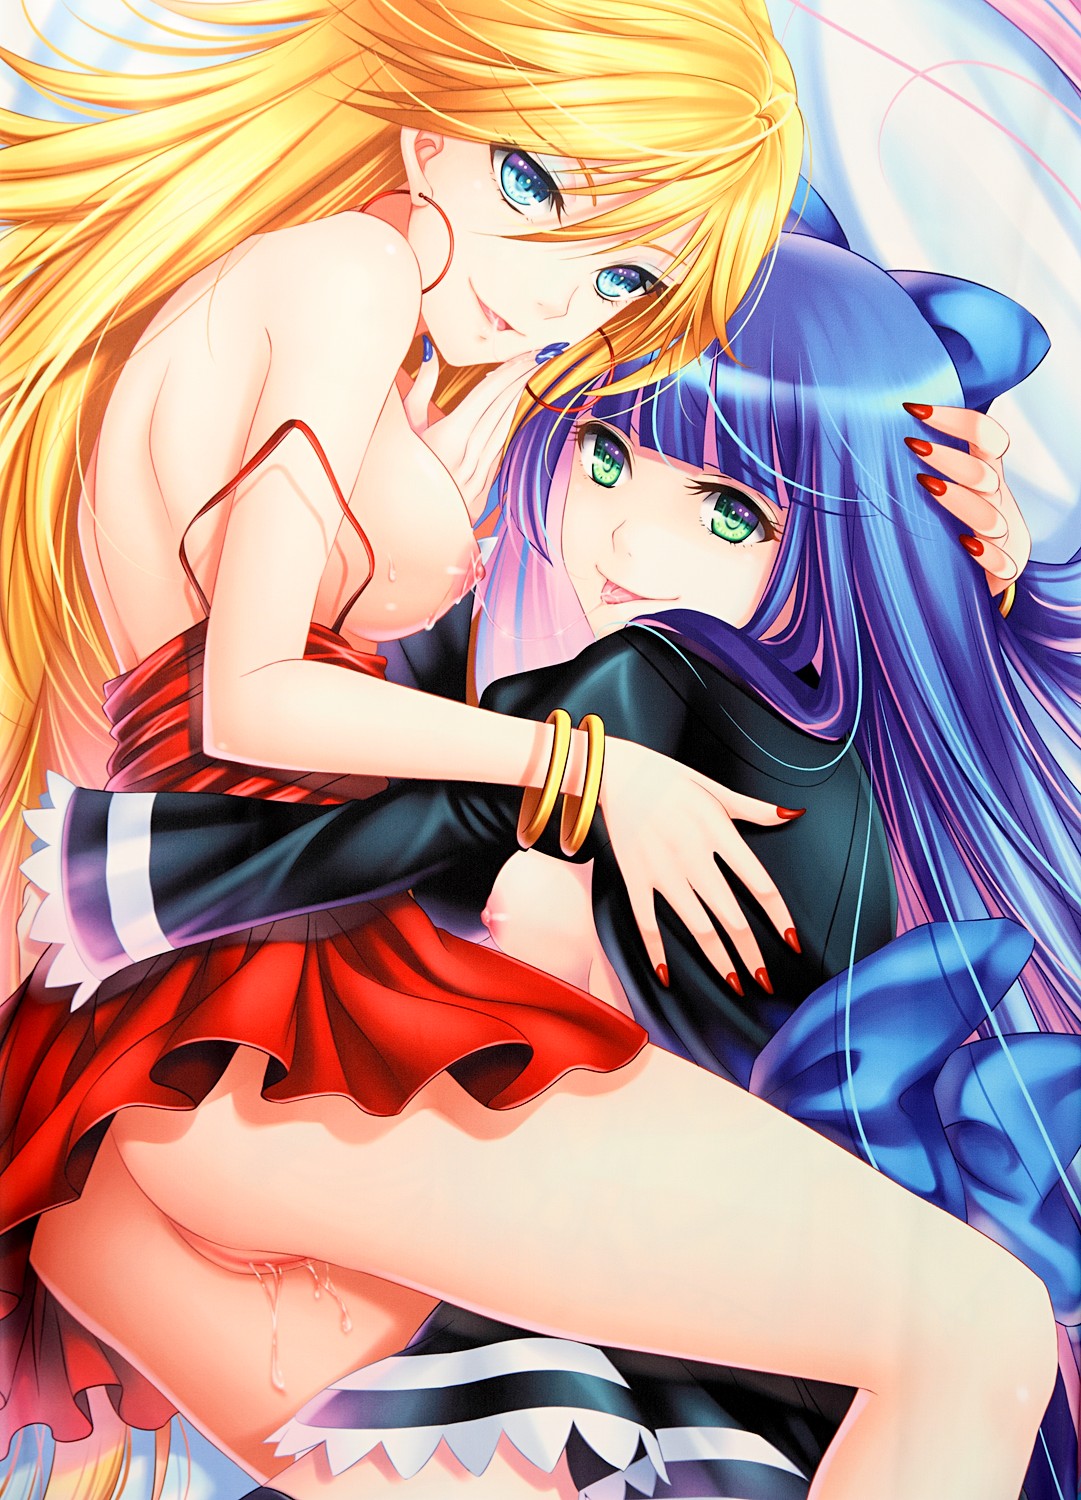 1081px x 1500px - Panty And Stocking Porn 89883 | Panty and Stocking Dakimakur